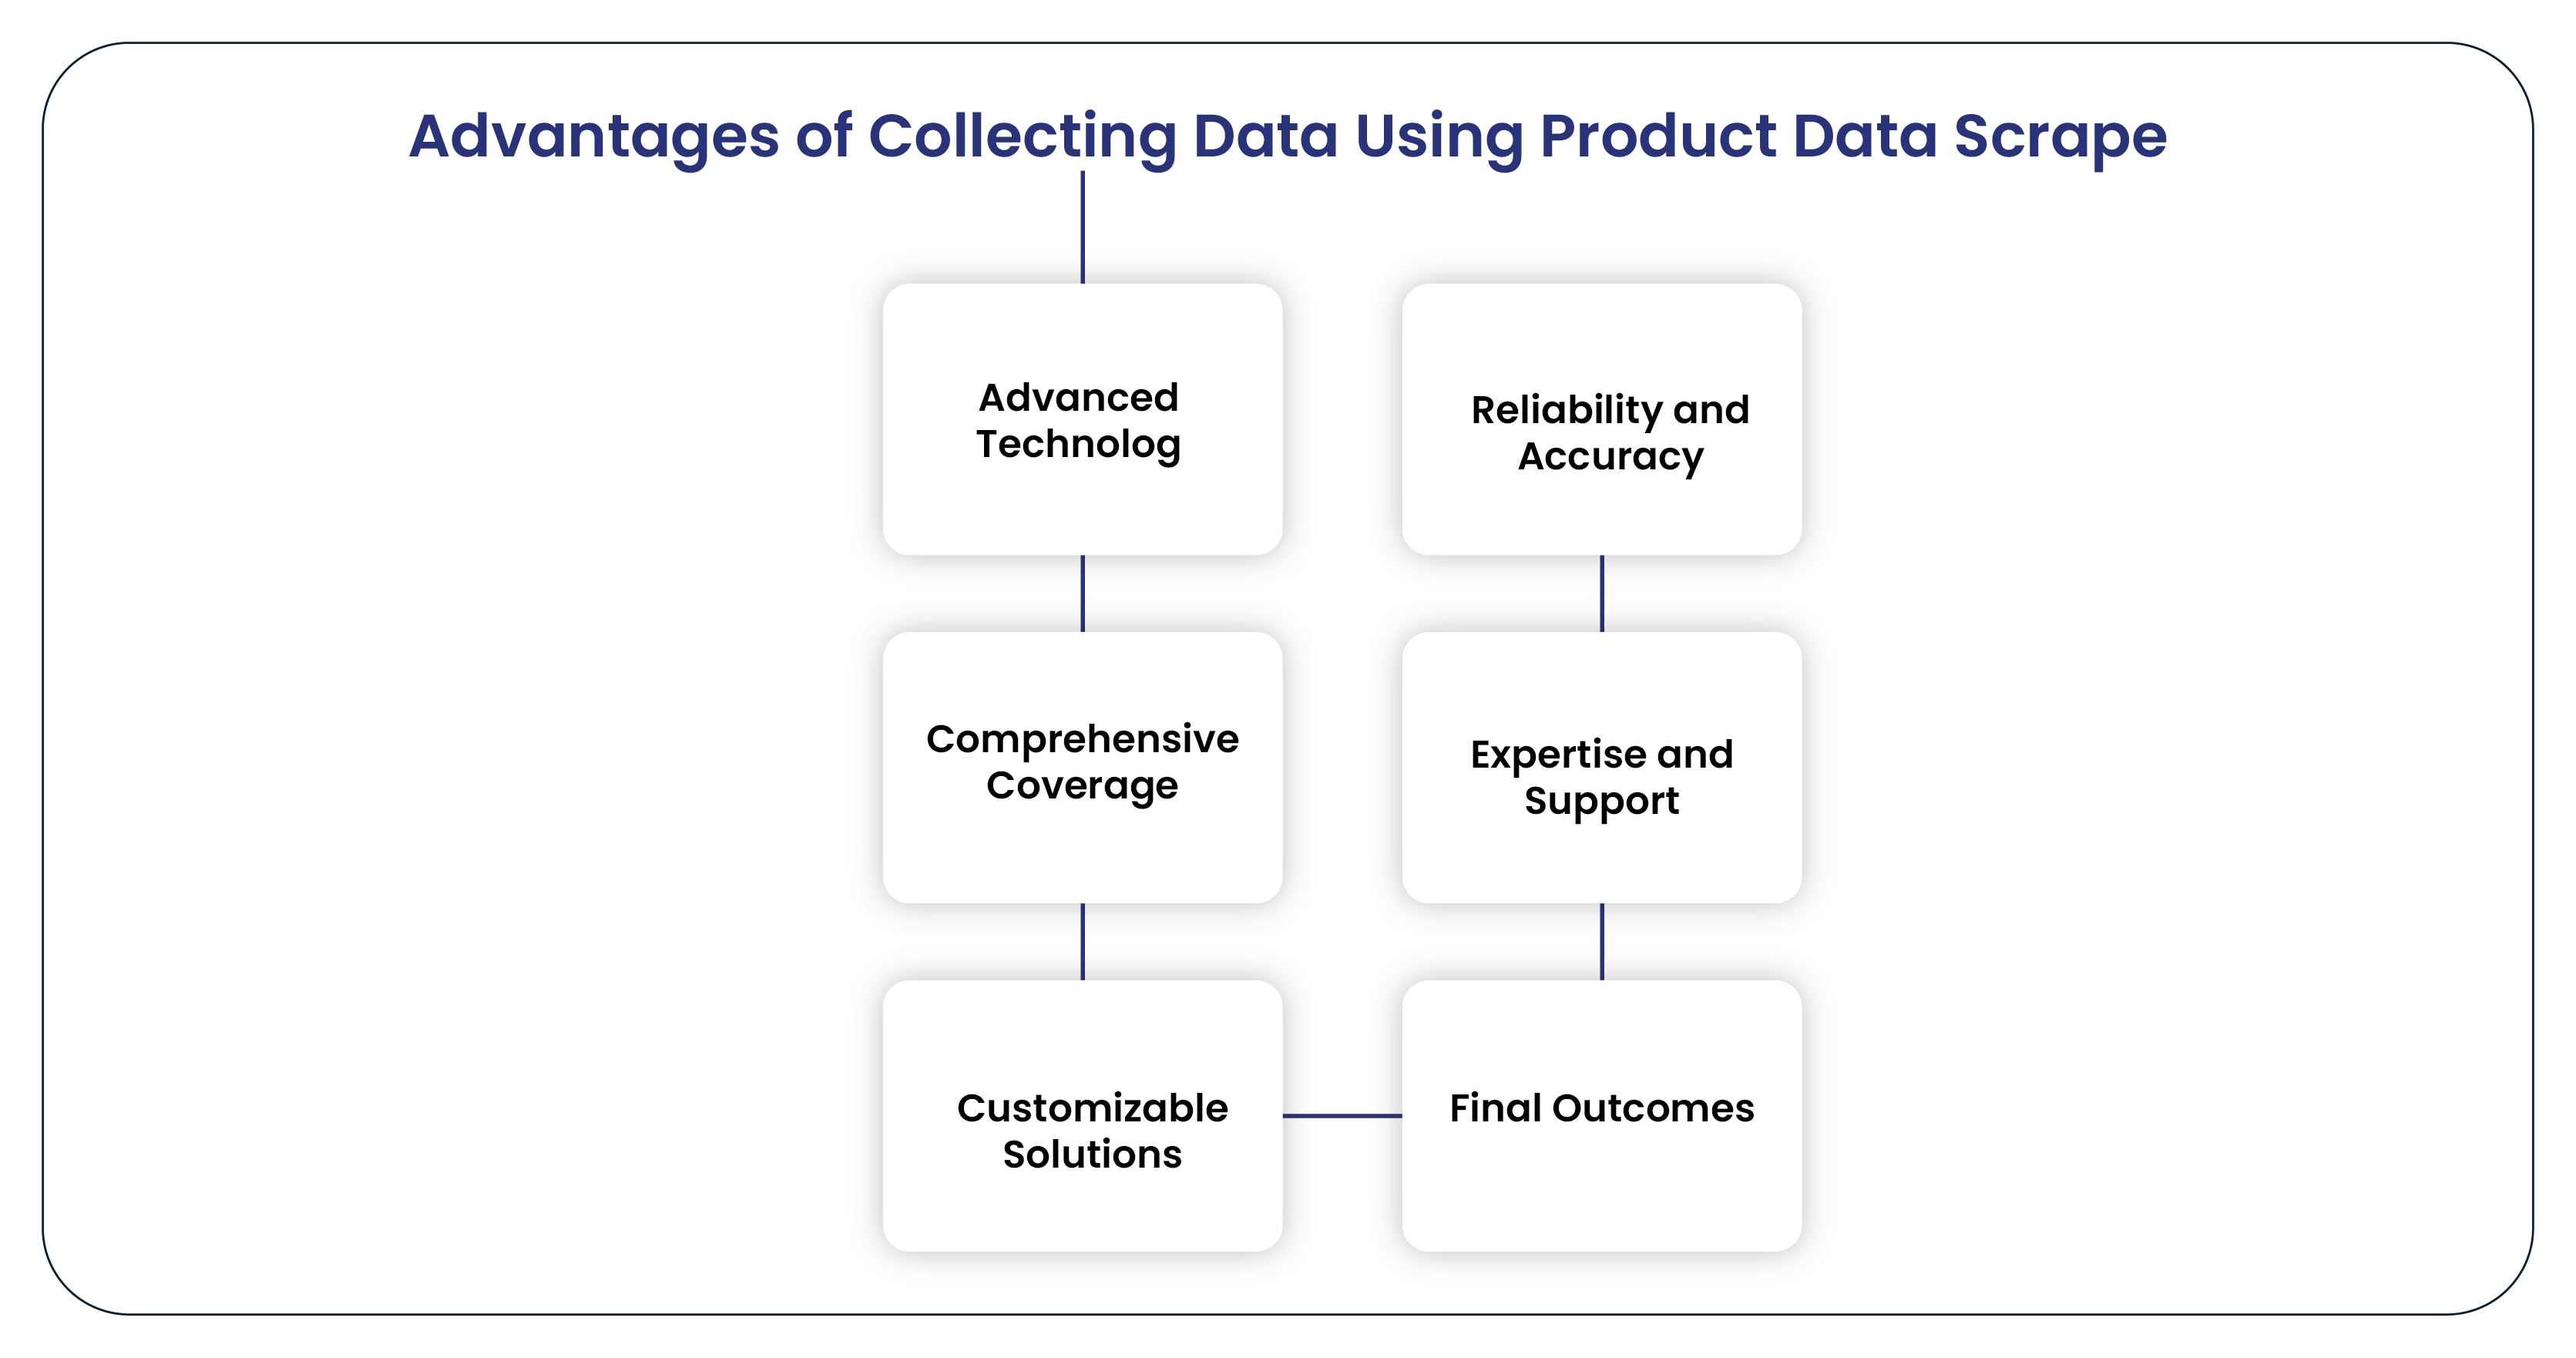 Advantages of Collecting Data Using Product Data Scrape-01